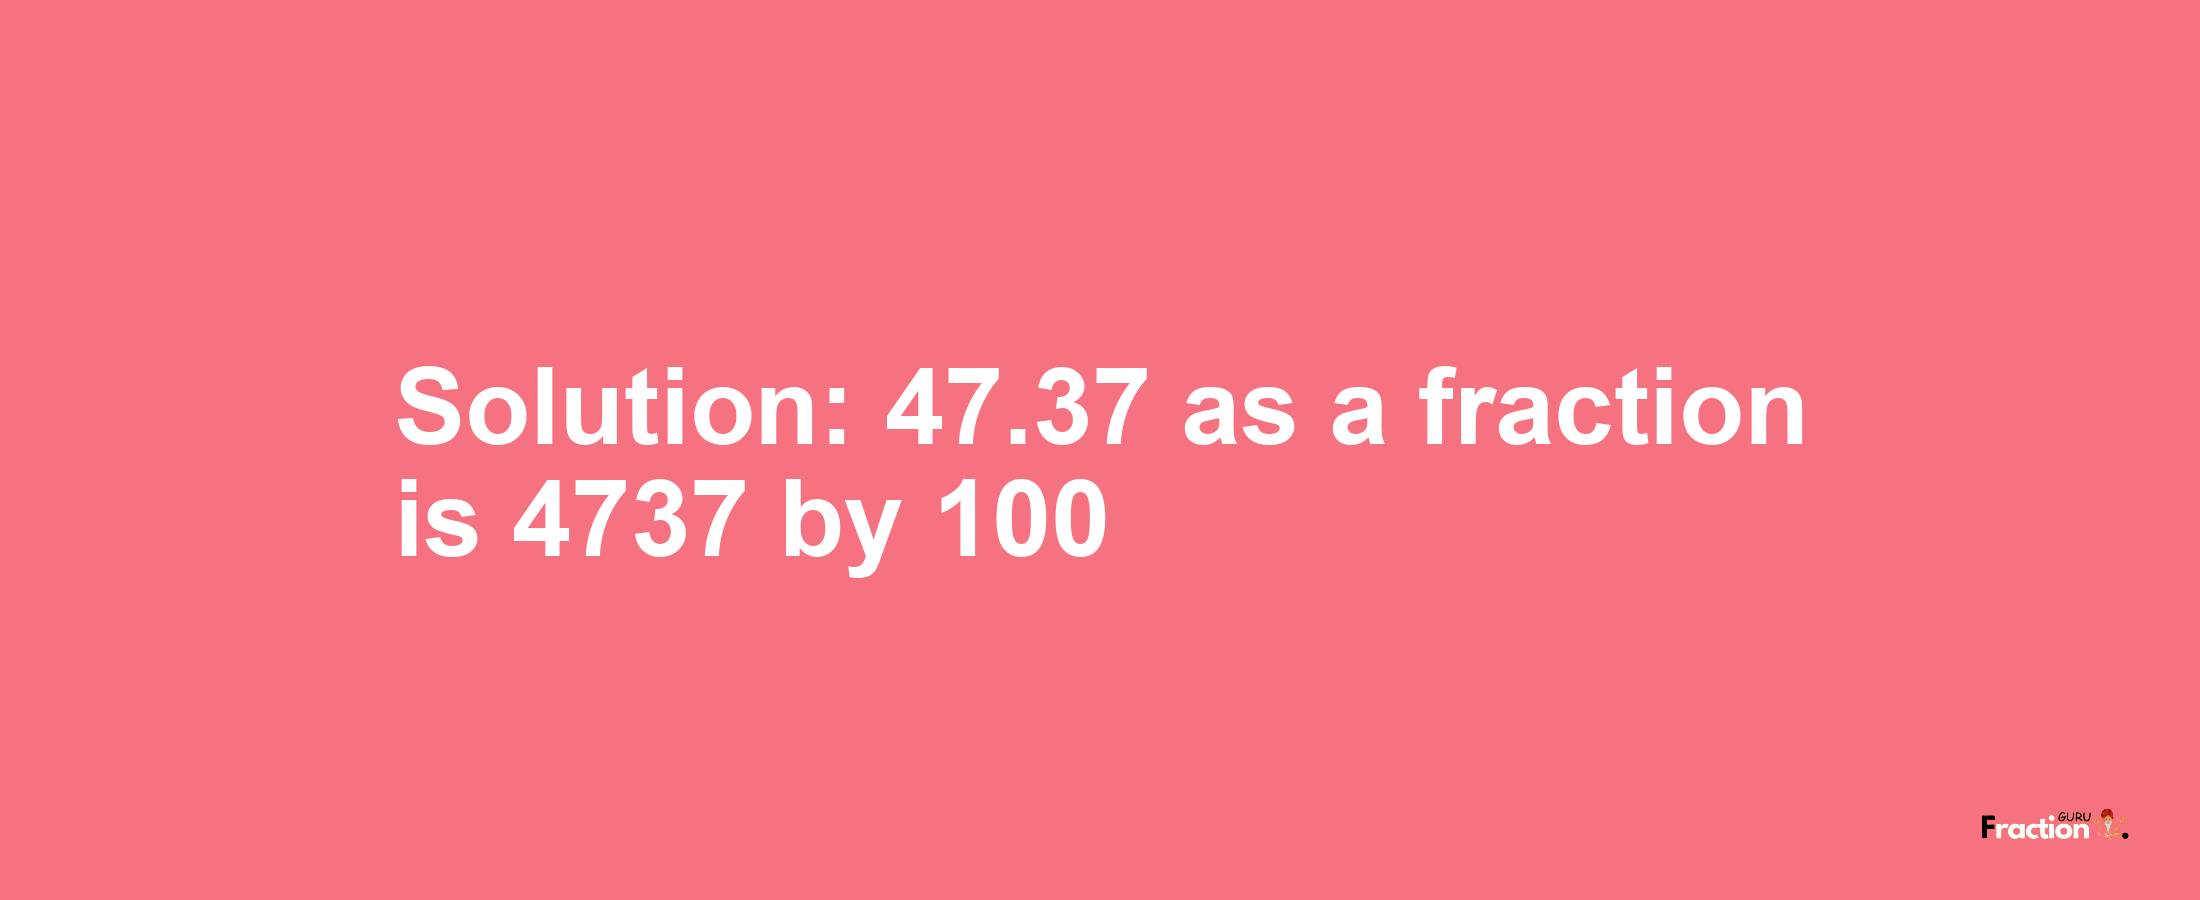 Solution:47.37 as a fraction is 4737/100